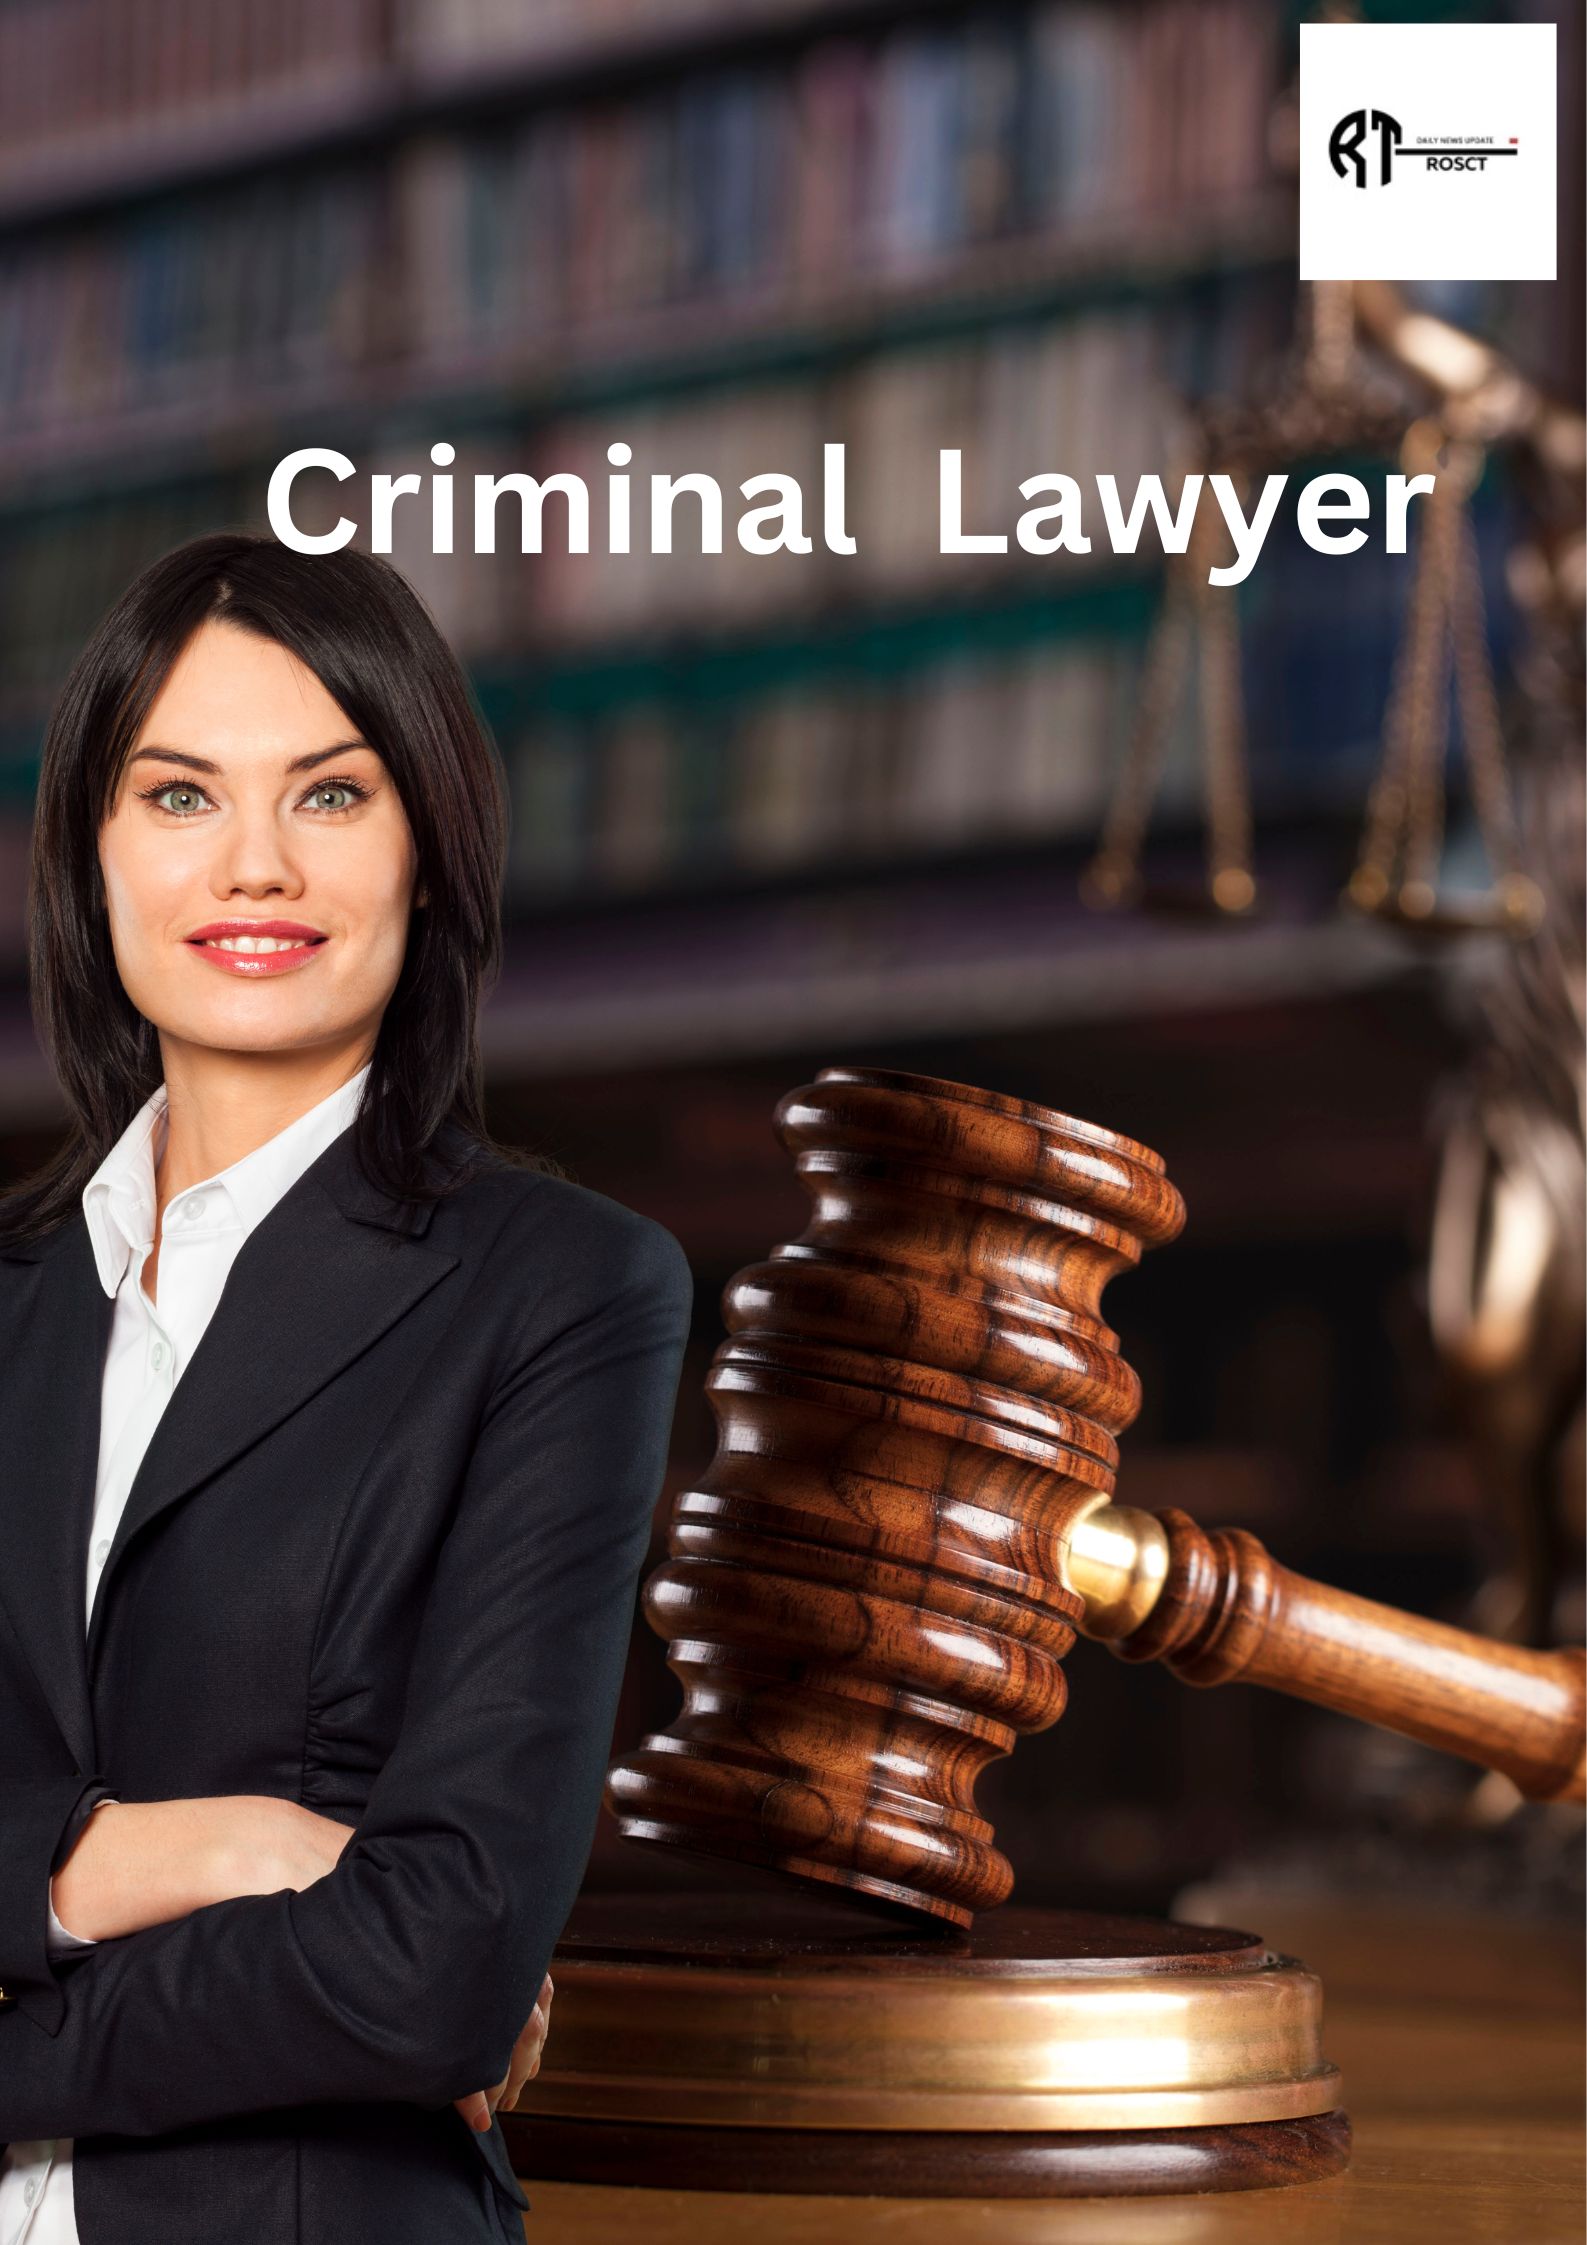 Are you facing criminal charges that could ruin your life? Do you need a lawyer who can fight for your rights and freedom? If so, you need to hire an experienced criminal defense lawyer as soon as possible.